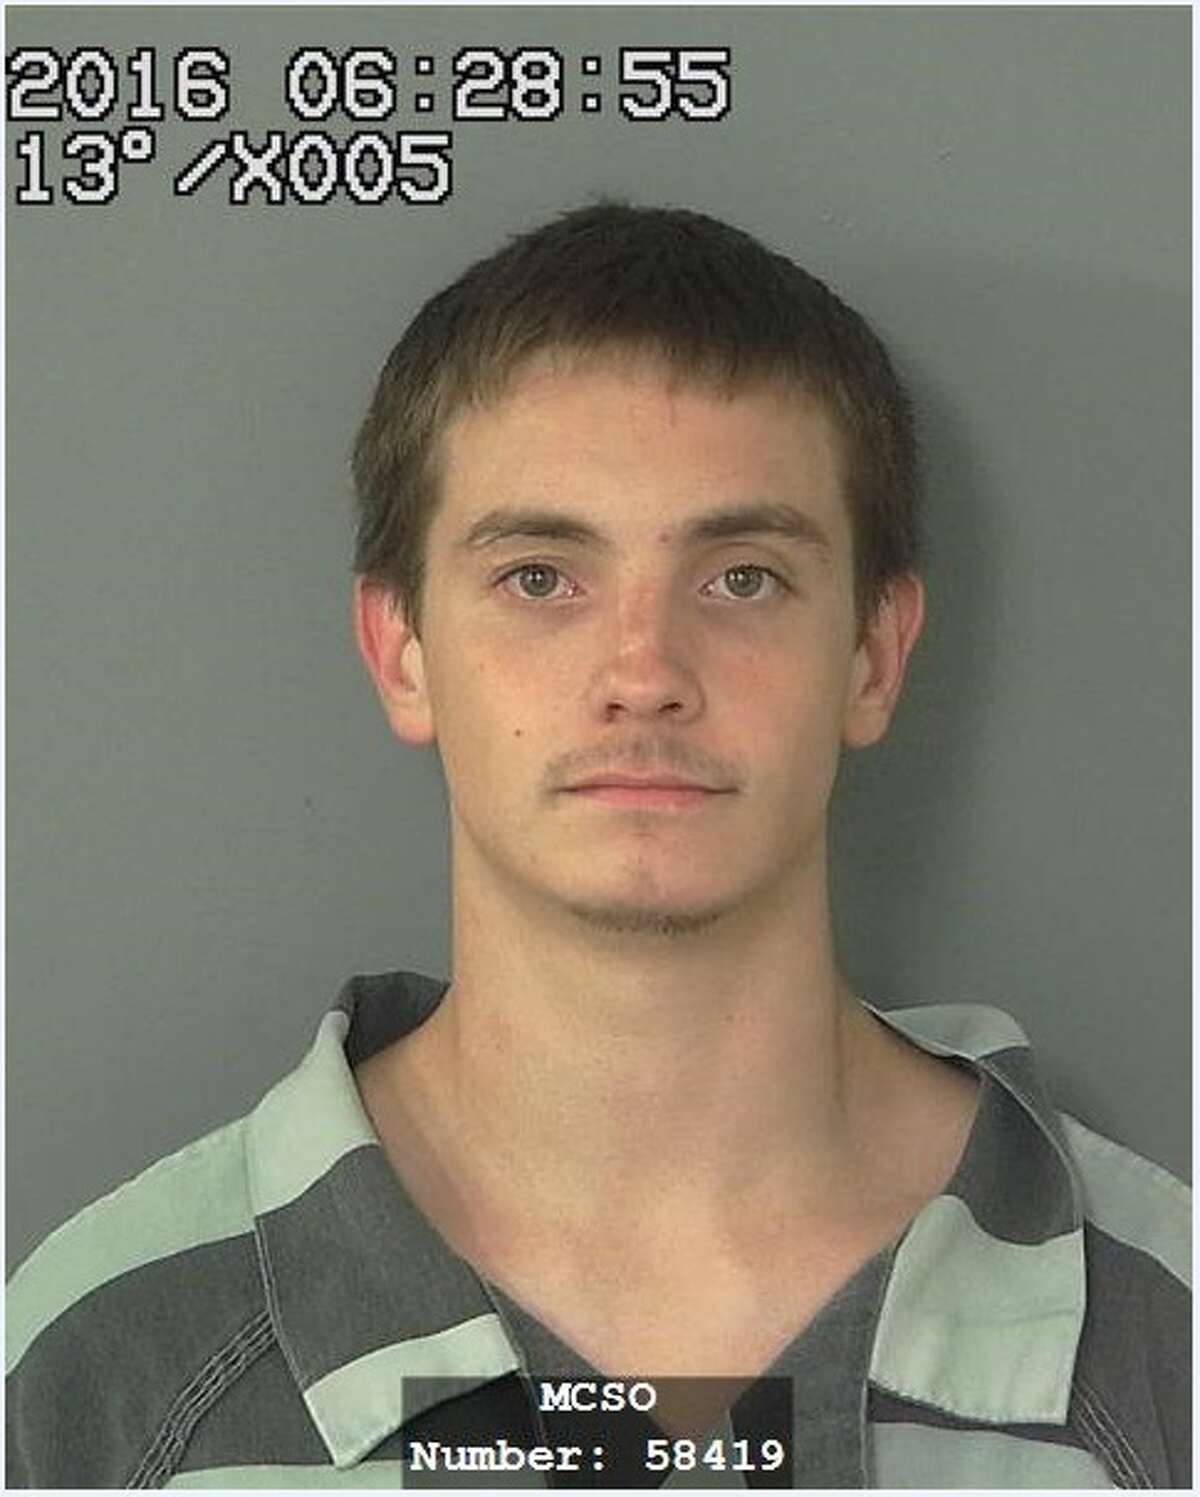 Joshua Allen Coker, 23, is wanted for starting a fire at a home in the 28100 block of Ivy Oaks Lane near Splendora.